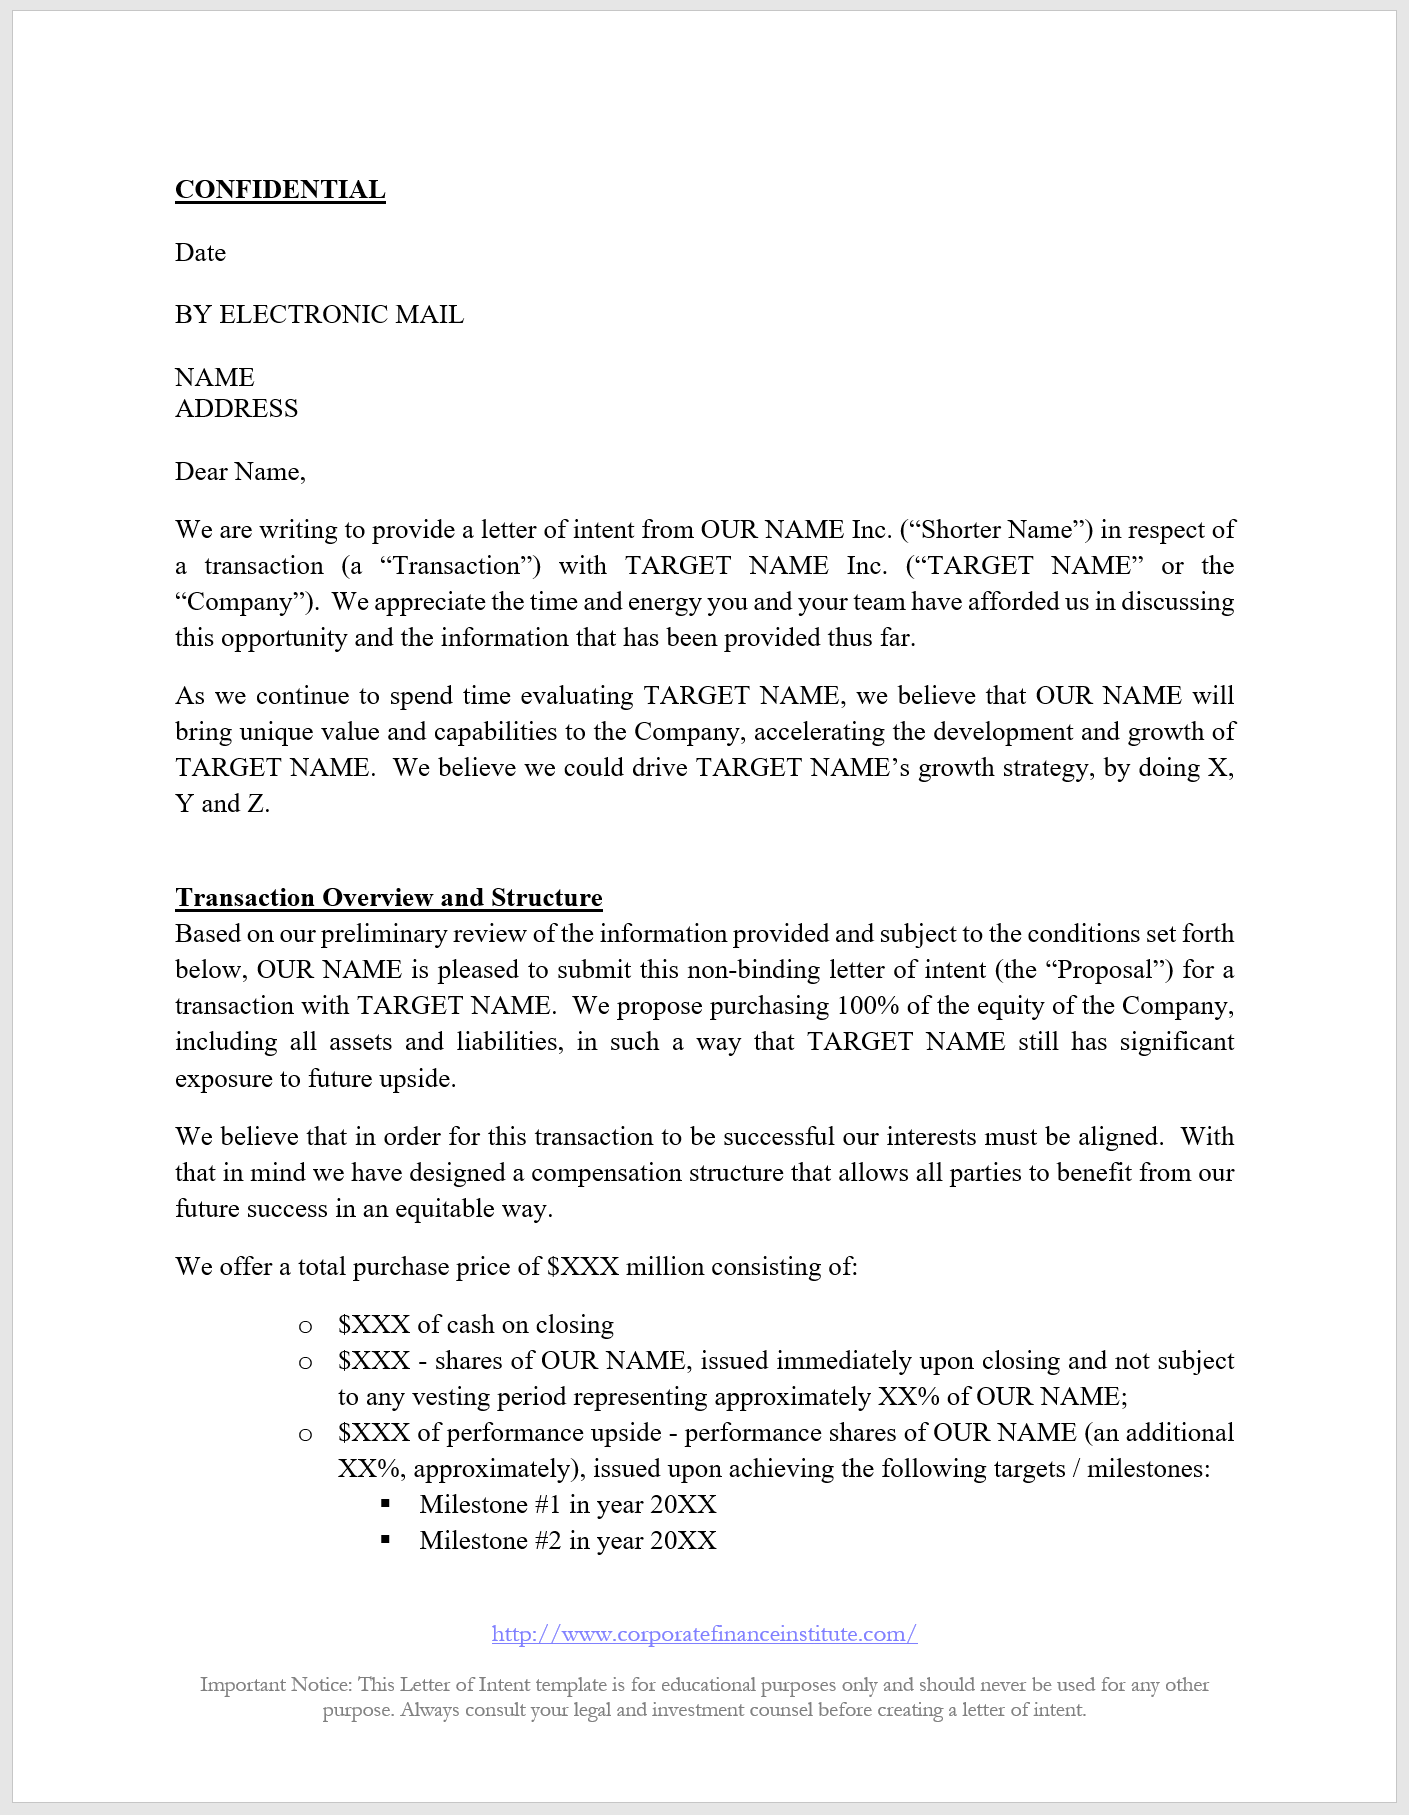 Sample Letter For Payment Terms And Conditions from corporatefinanceinstitute.com